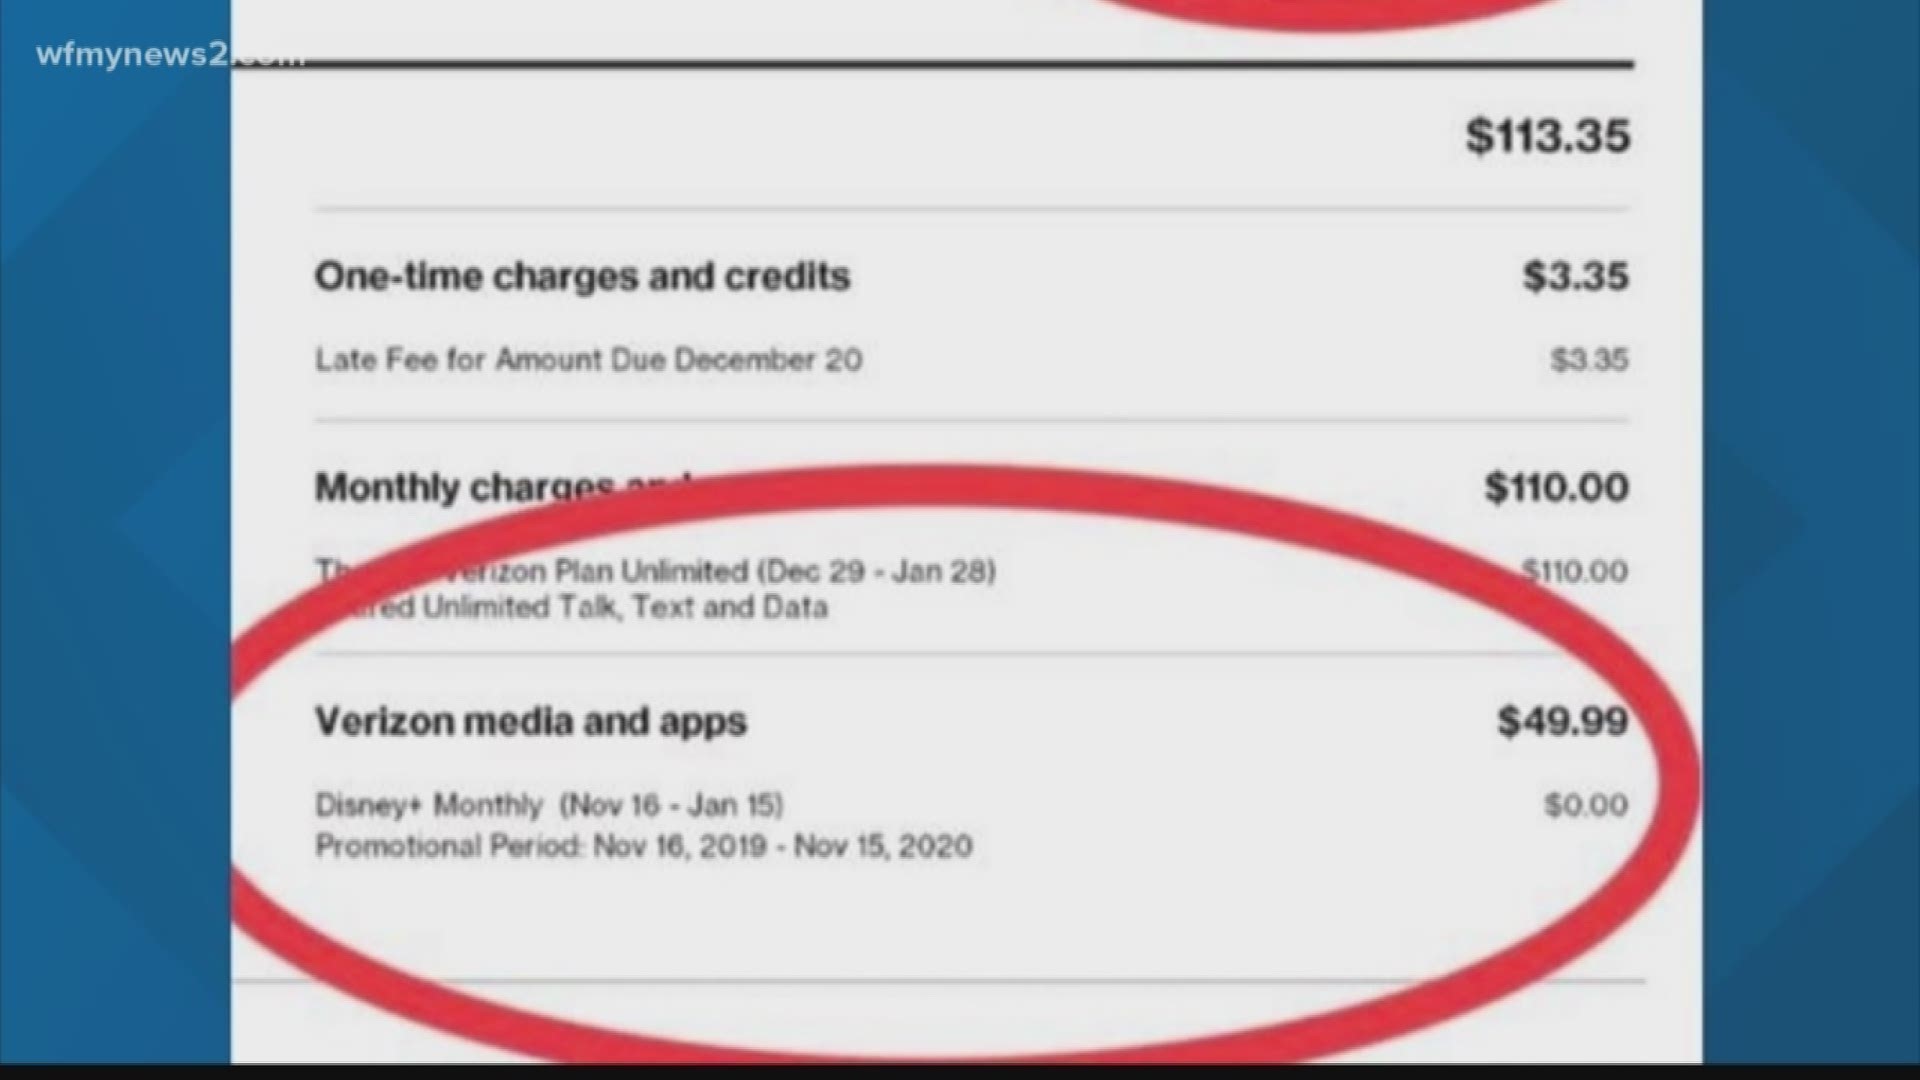 Verizon offered some customers a free year of Disney+, but some claim they’re actually be charged.